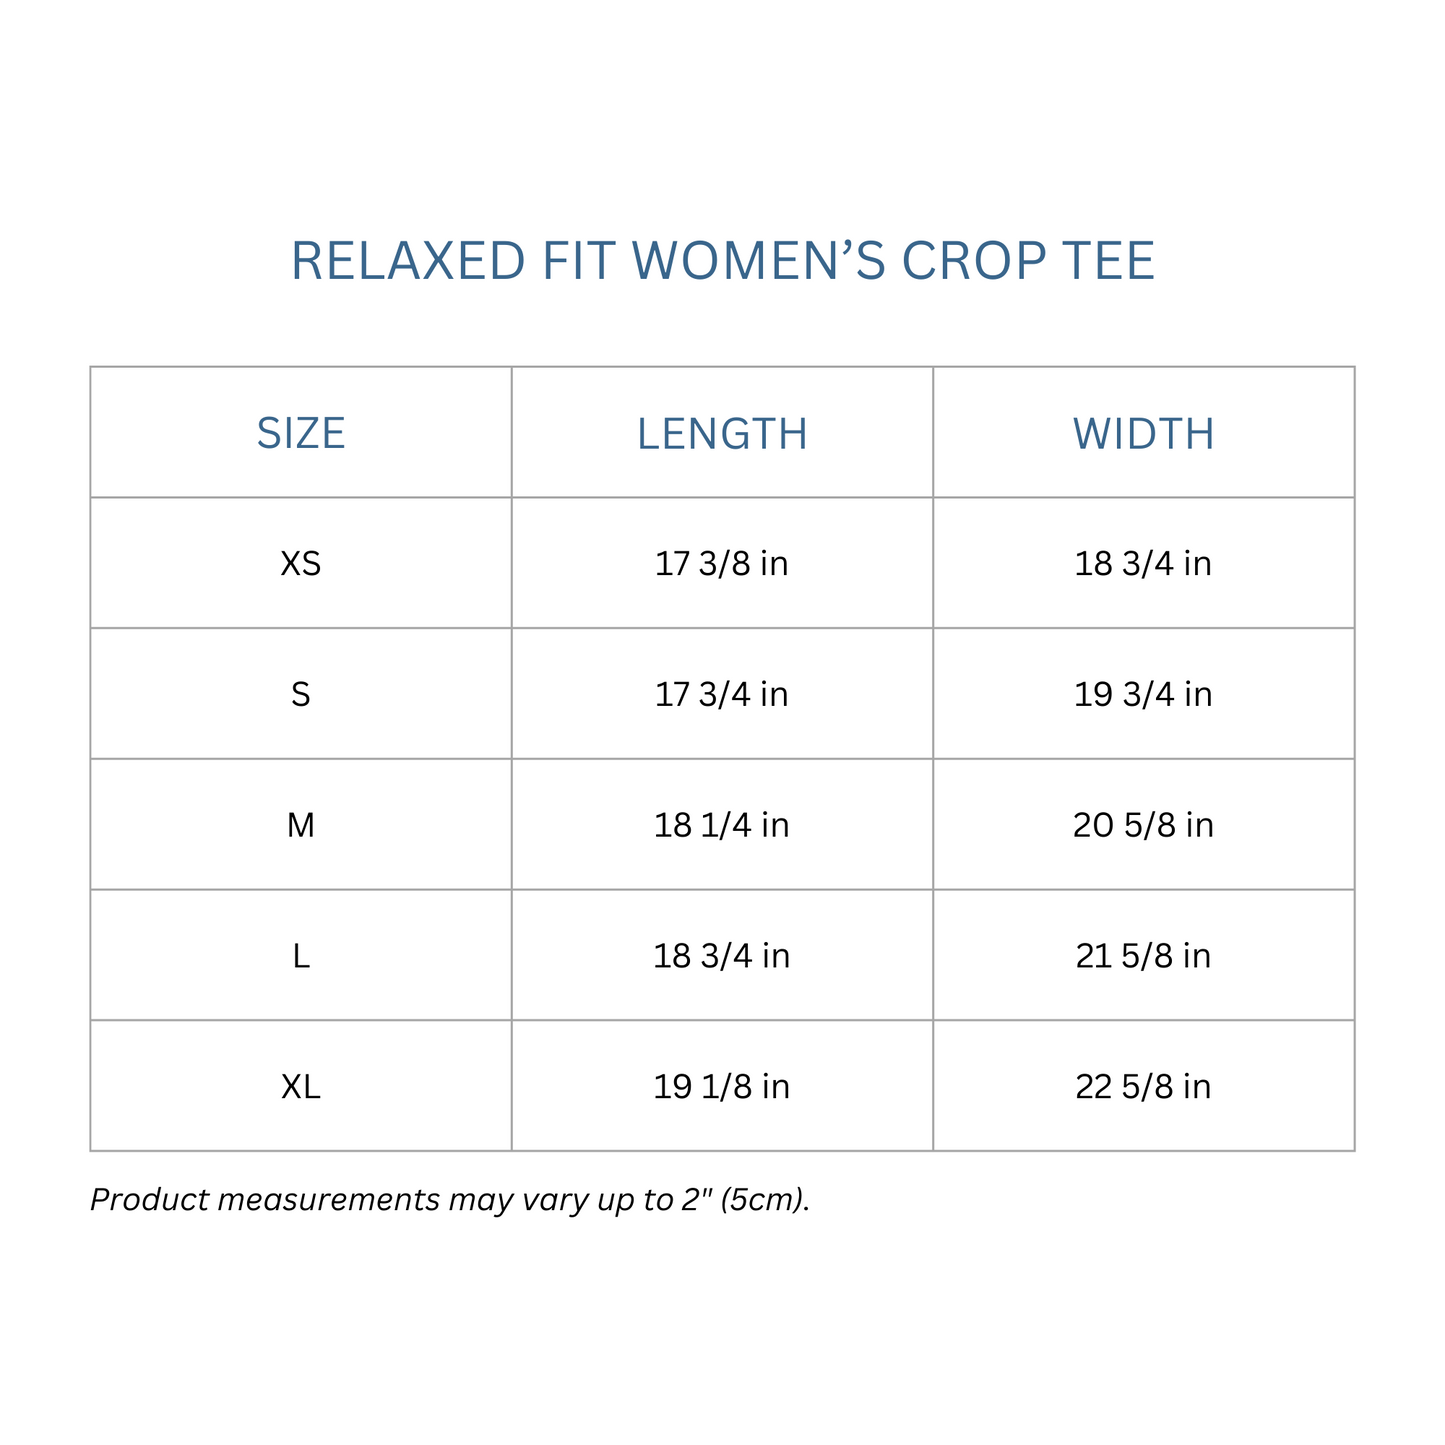 Totes Manila Co. size guide for relaxed fit women's crop tee